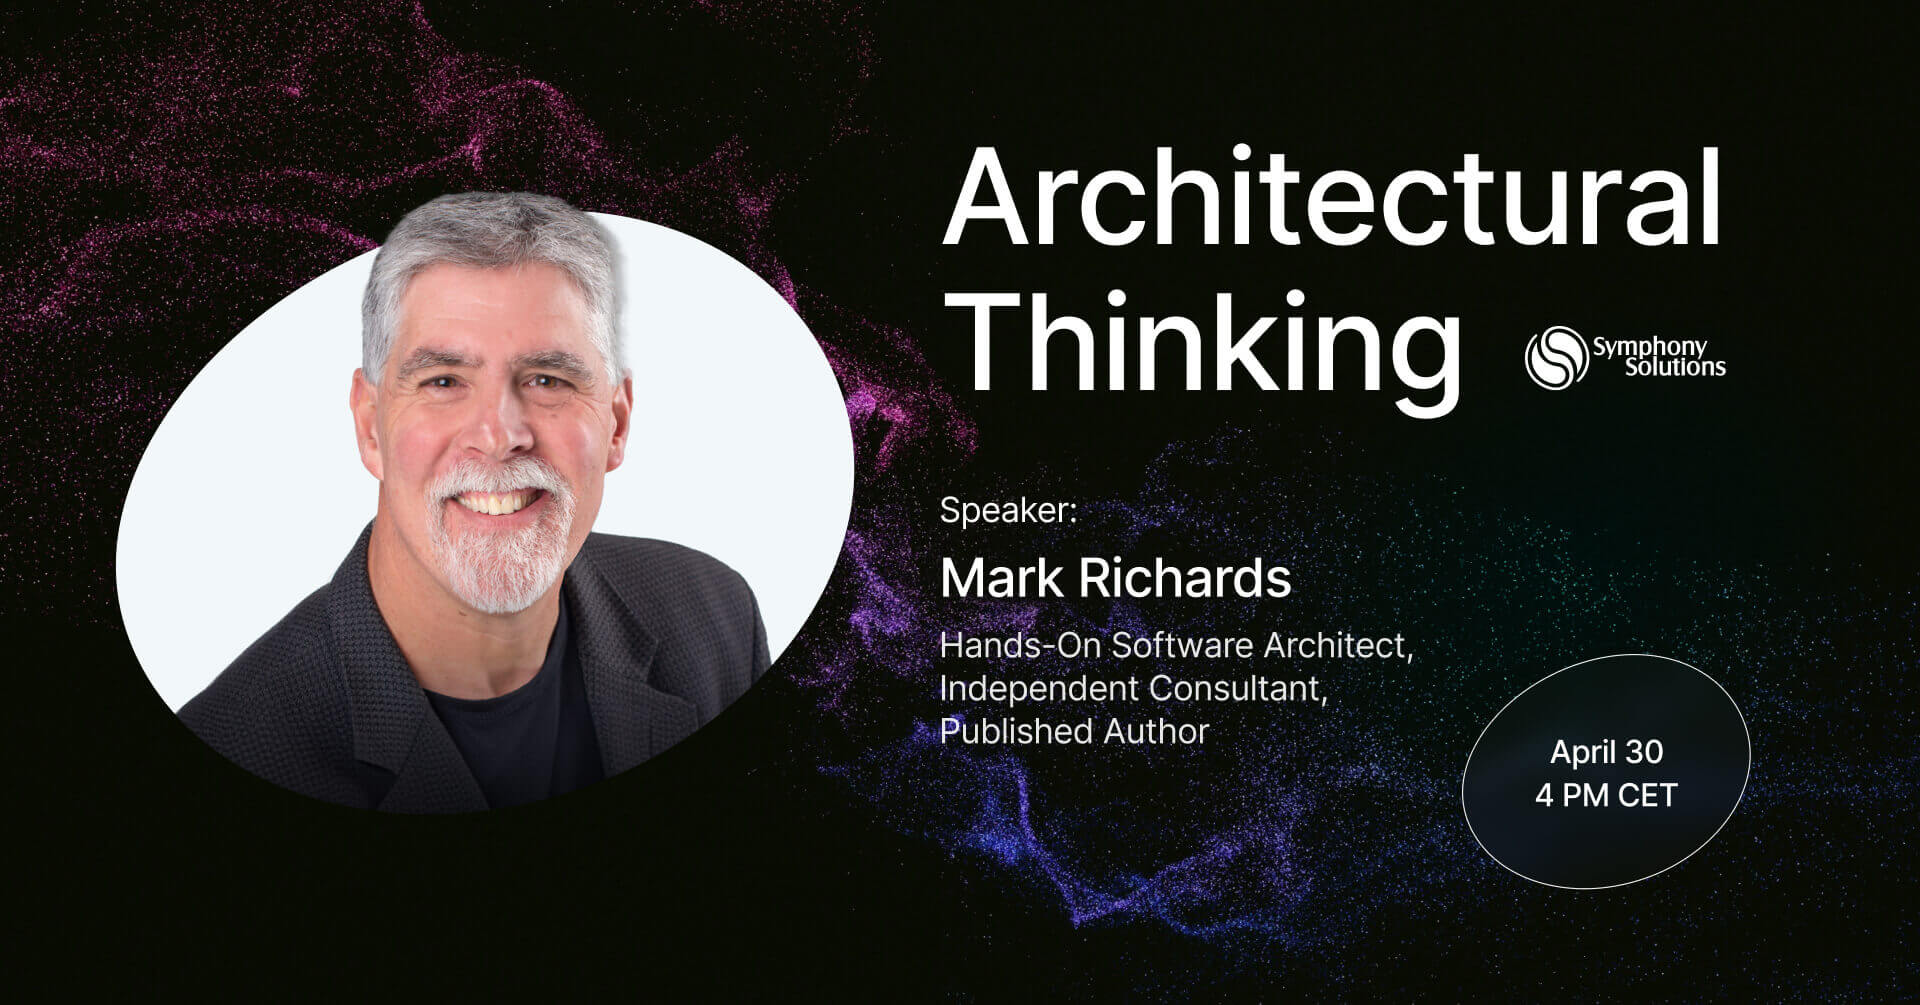 Webinar registration: Get Ahead in Tech with Architectural Thinking